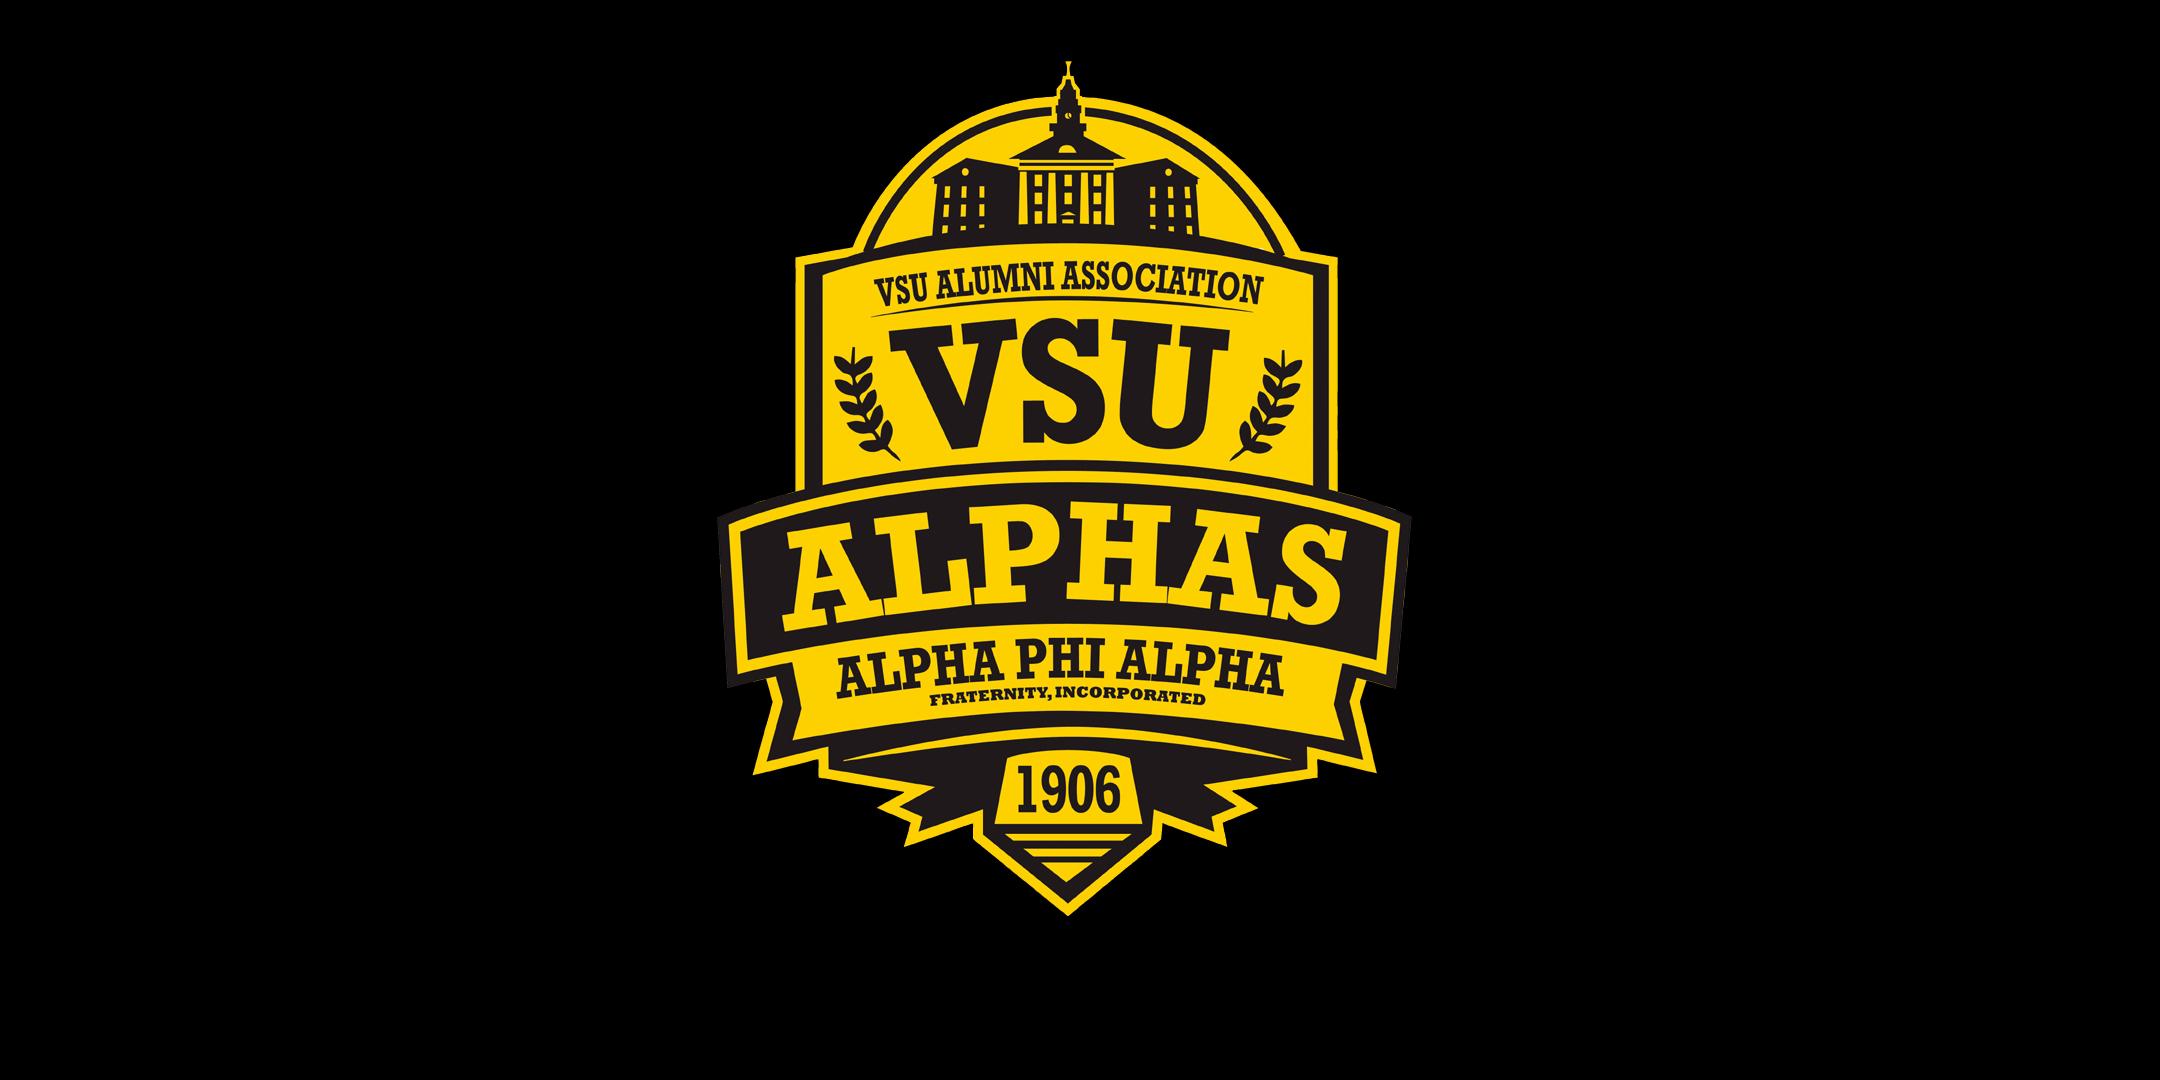 VSU Alphas Scholarship Golf Tournament presented by the Thurgood Marshall College Fund